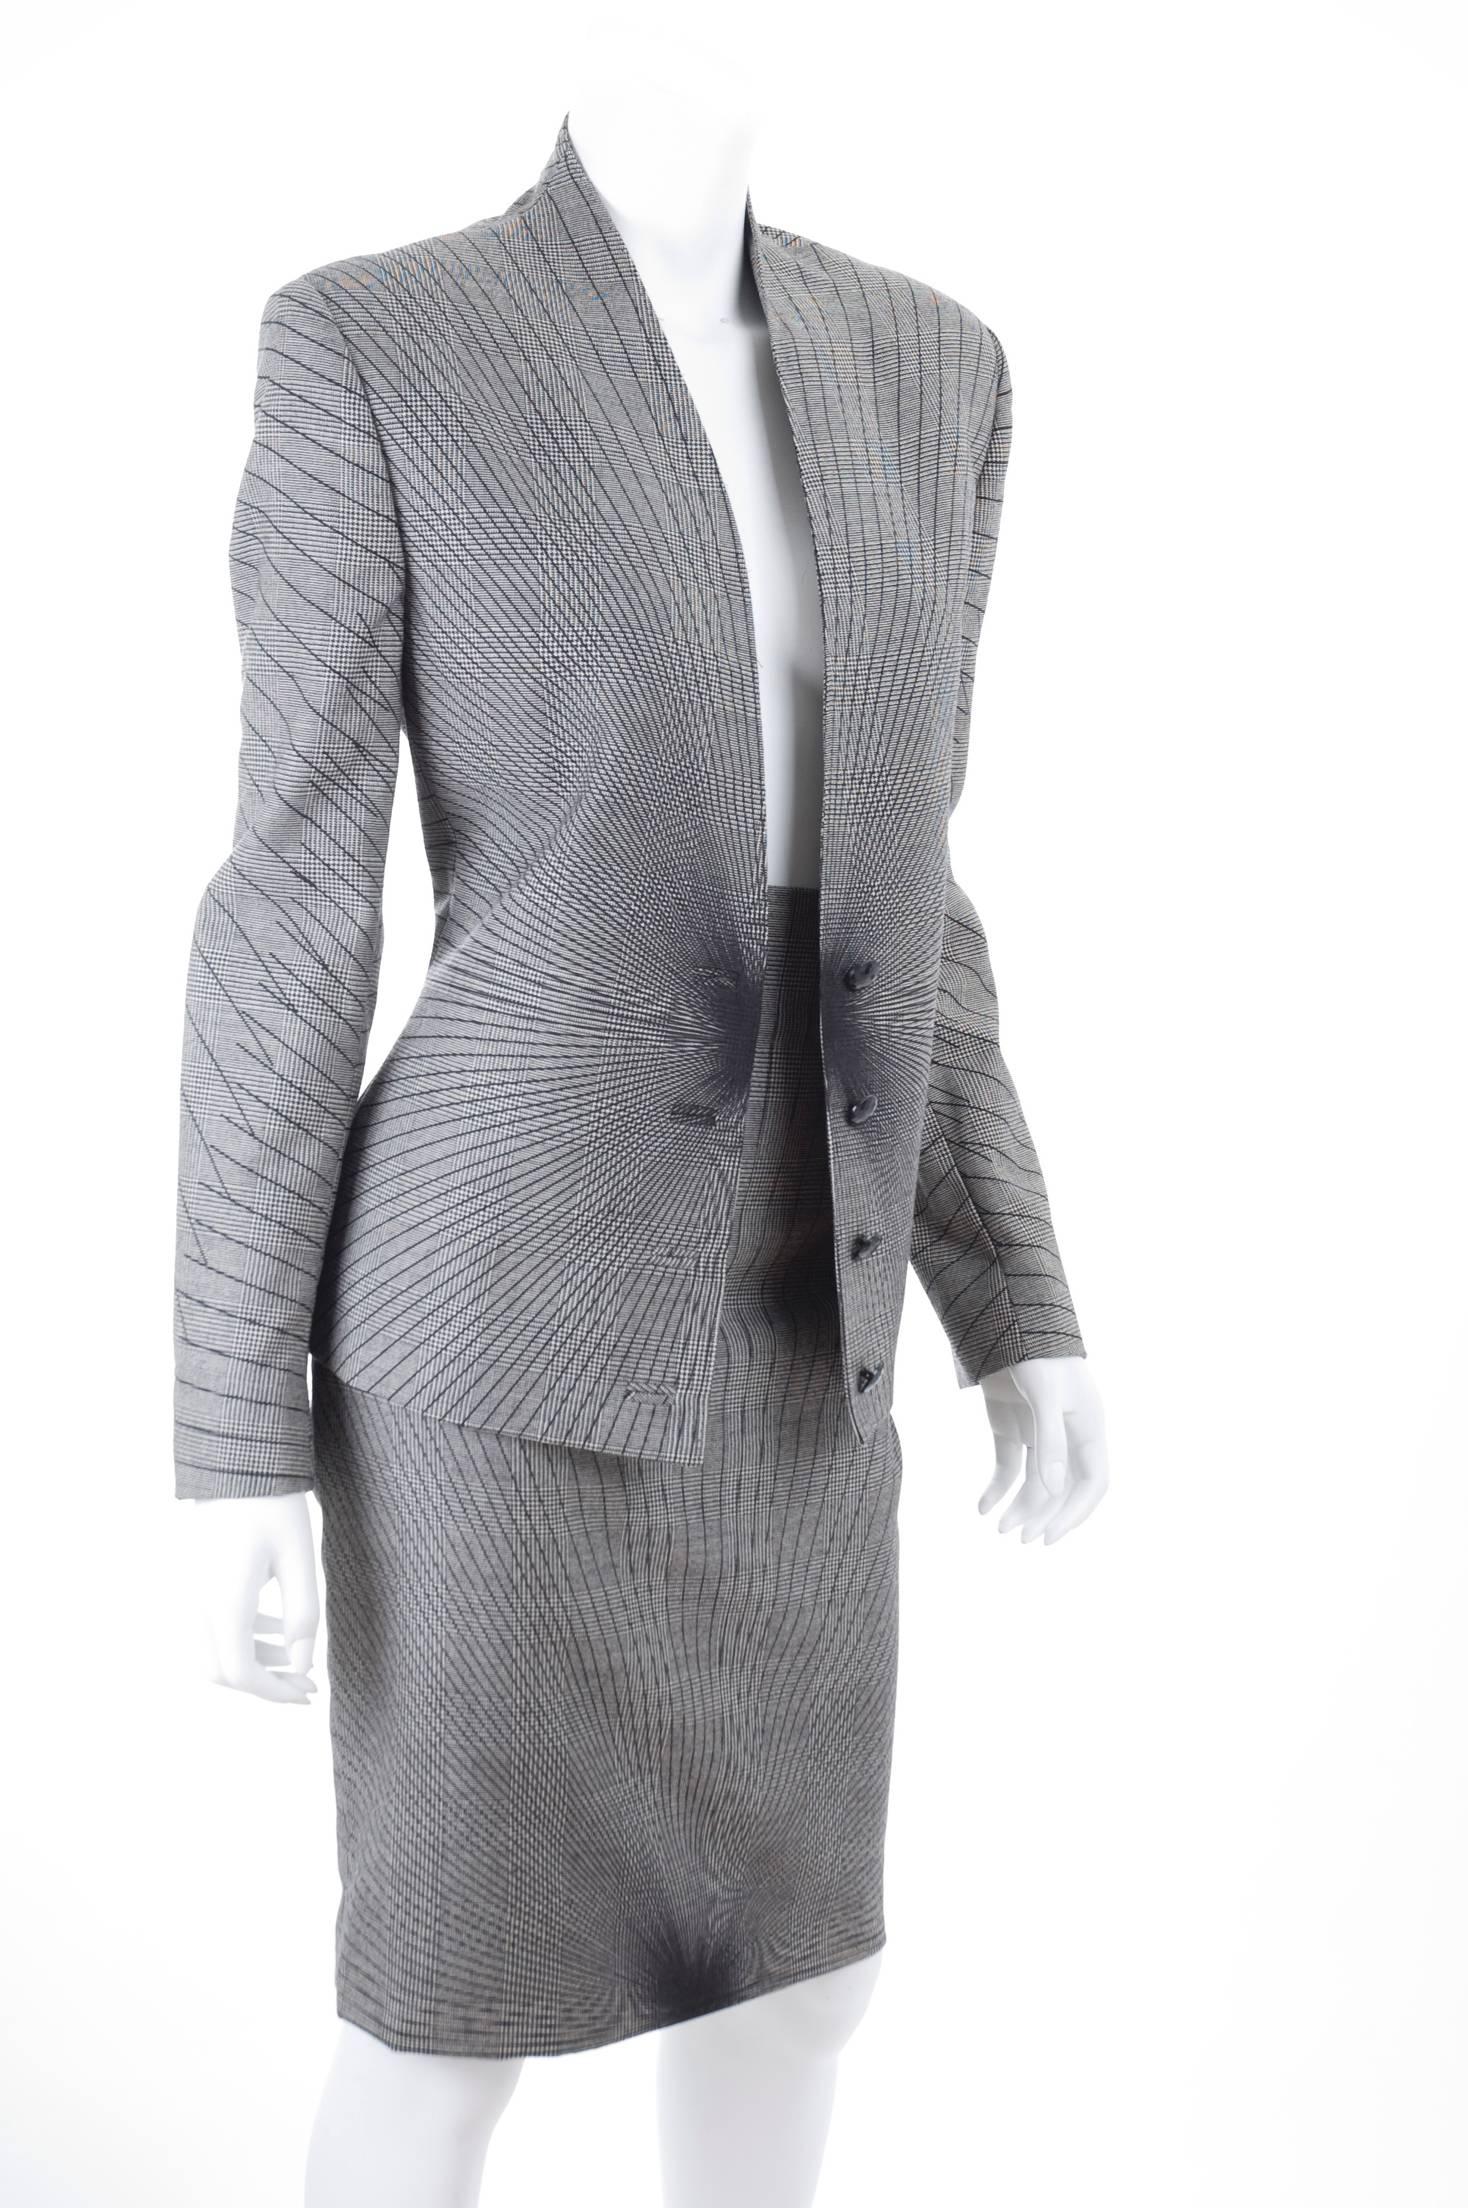 Vintage 90's Gianni Versace Couture Suit In Excellent Condition For Sale In Hamburg, Deutschland